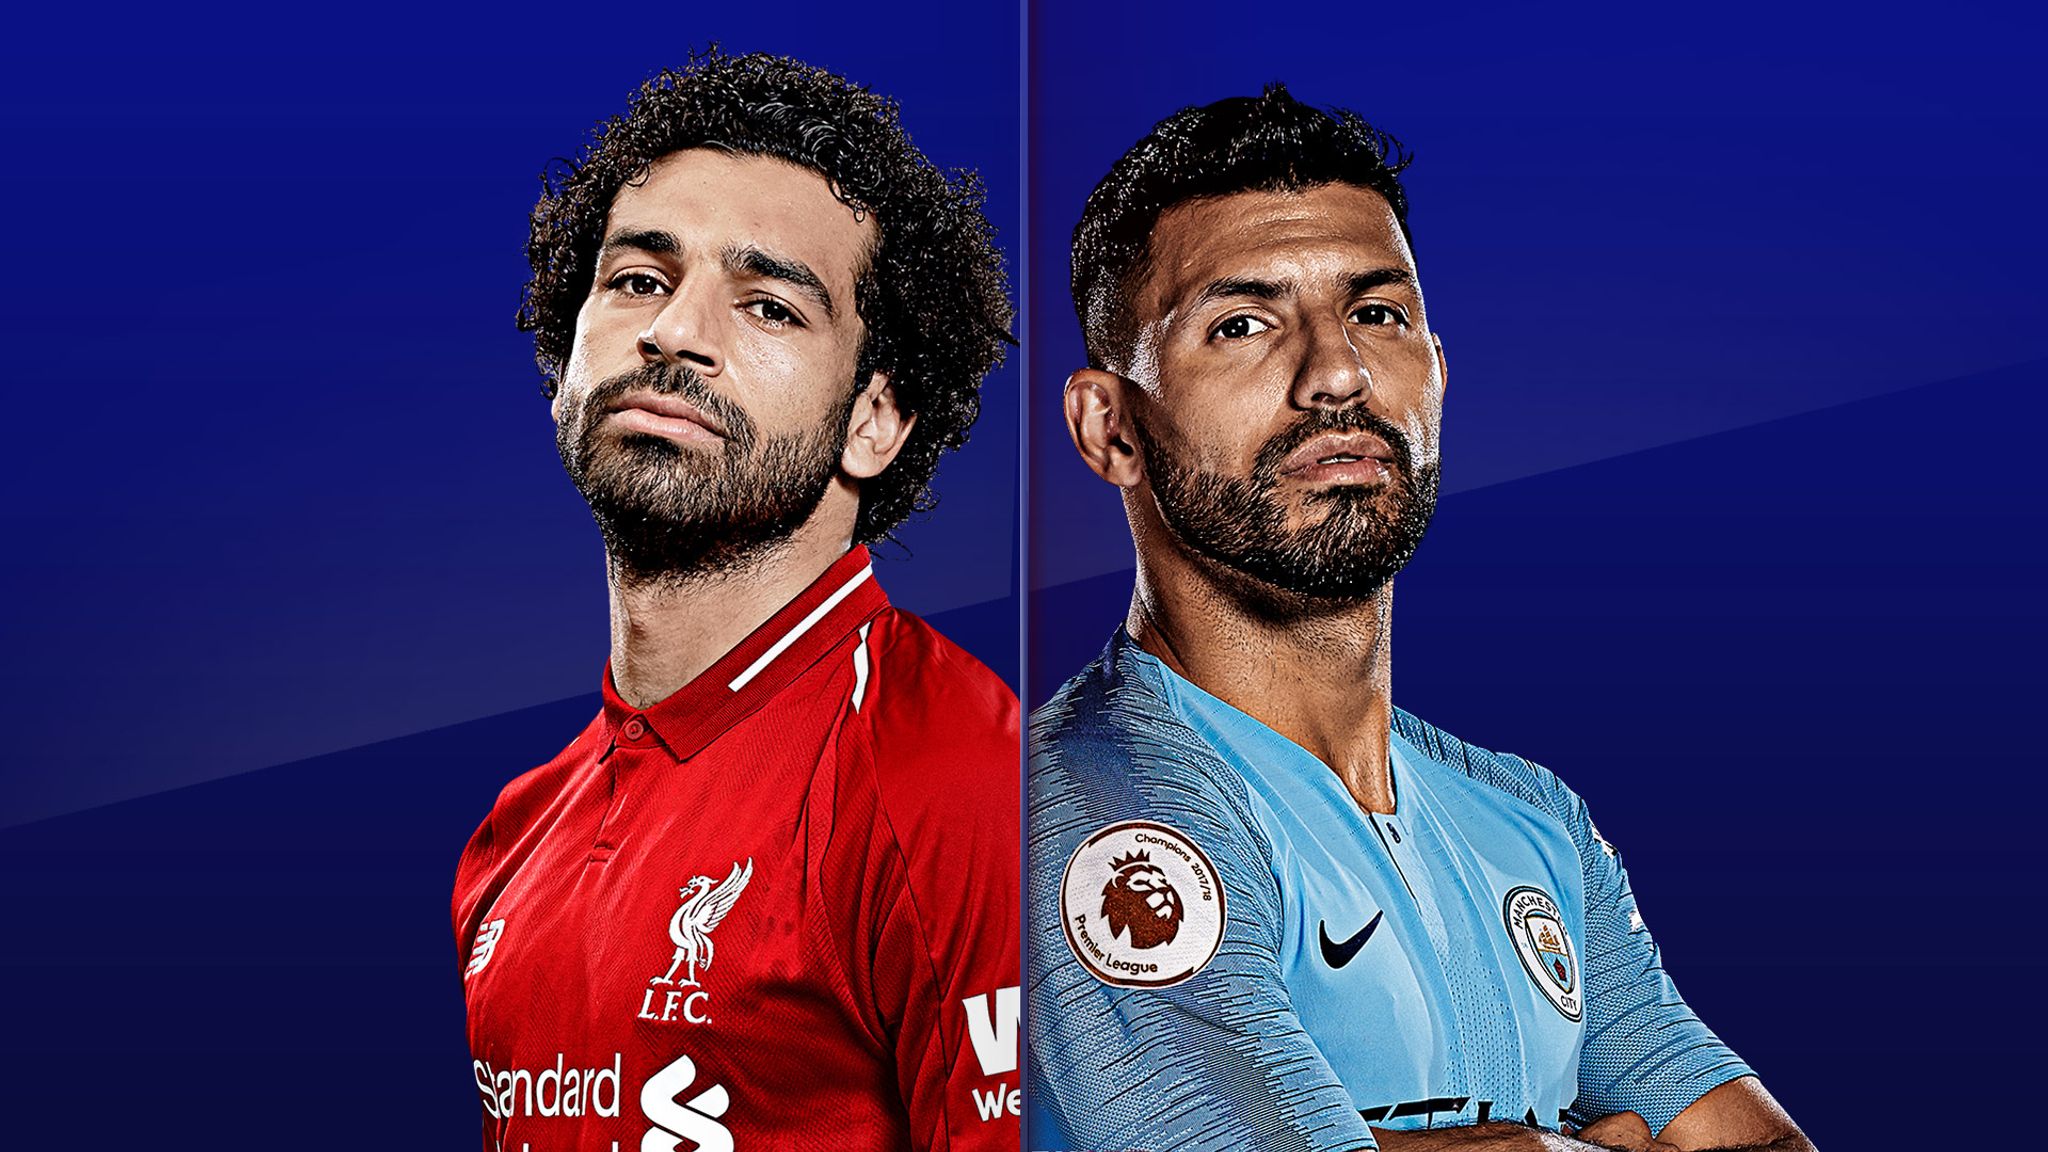 UEFA Champions League 2017/18: 5 best Liverpool players this season